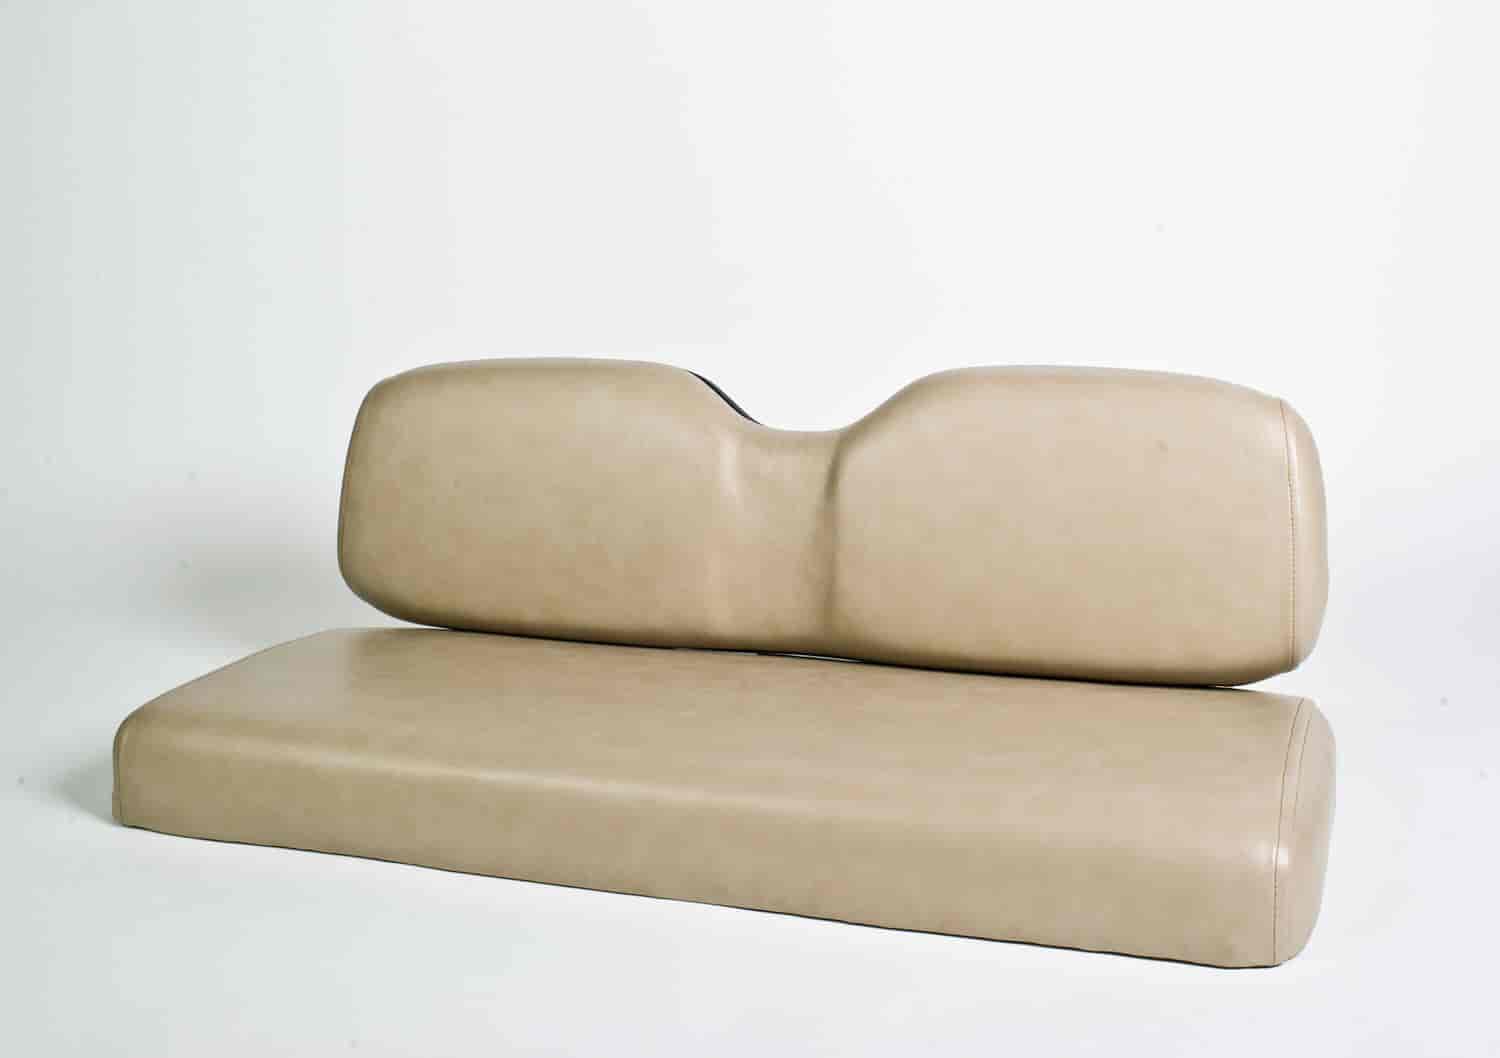 Designed for our rear 2n1 flip seats these high quality molded cushions feature Omnova marine-grade